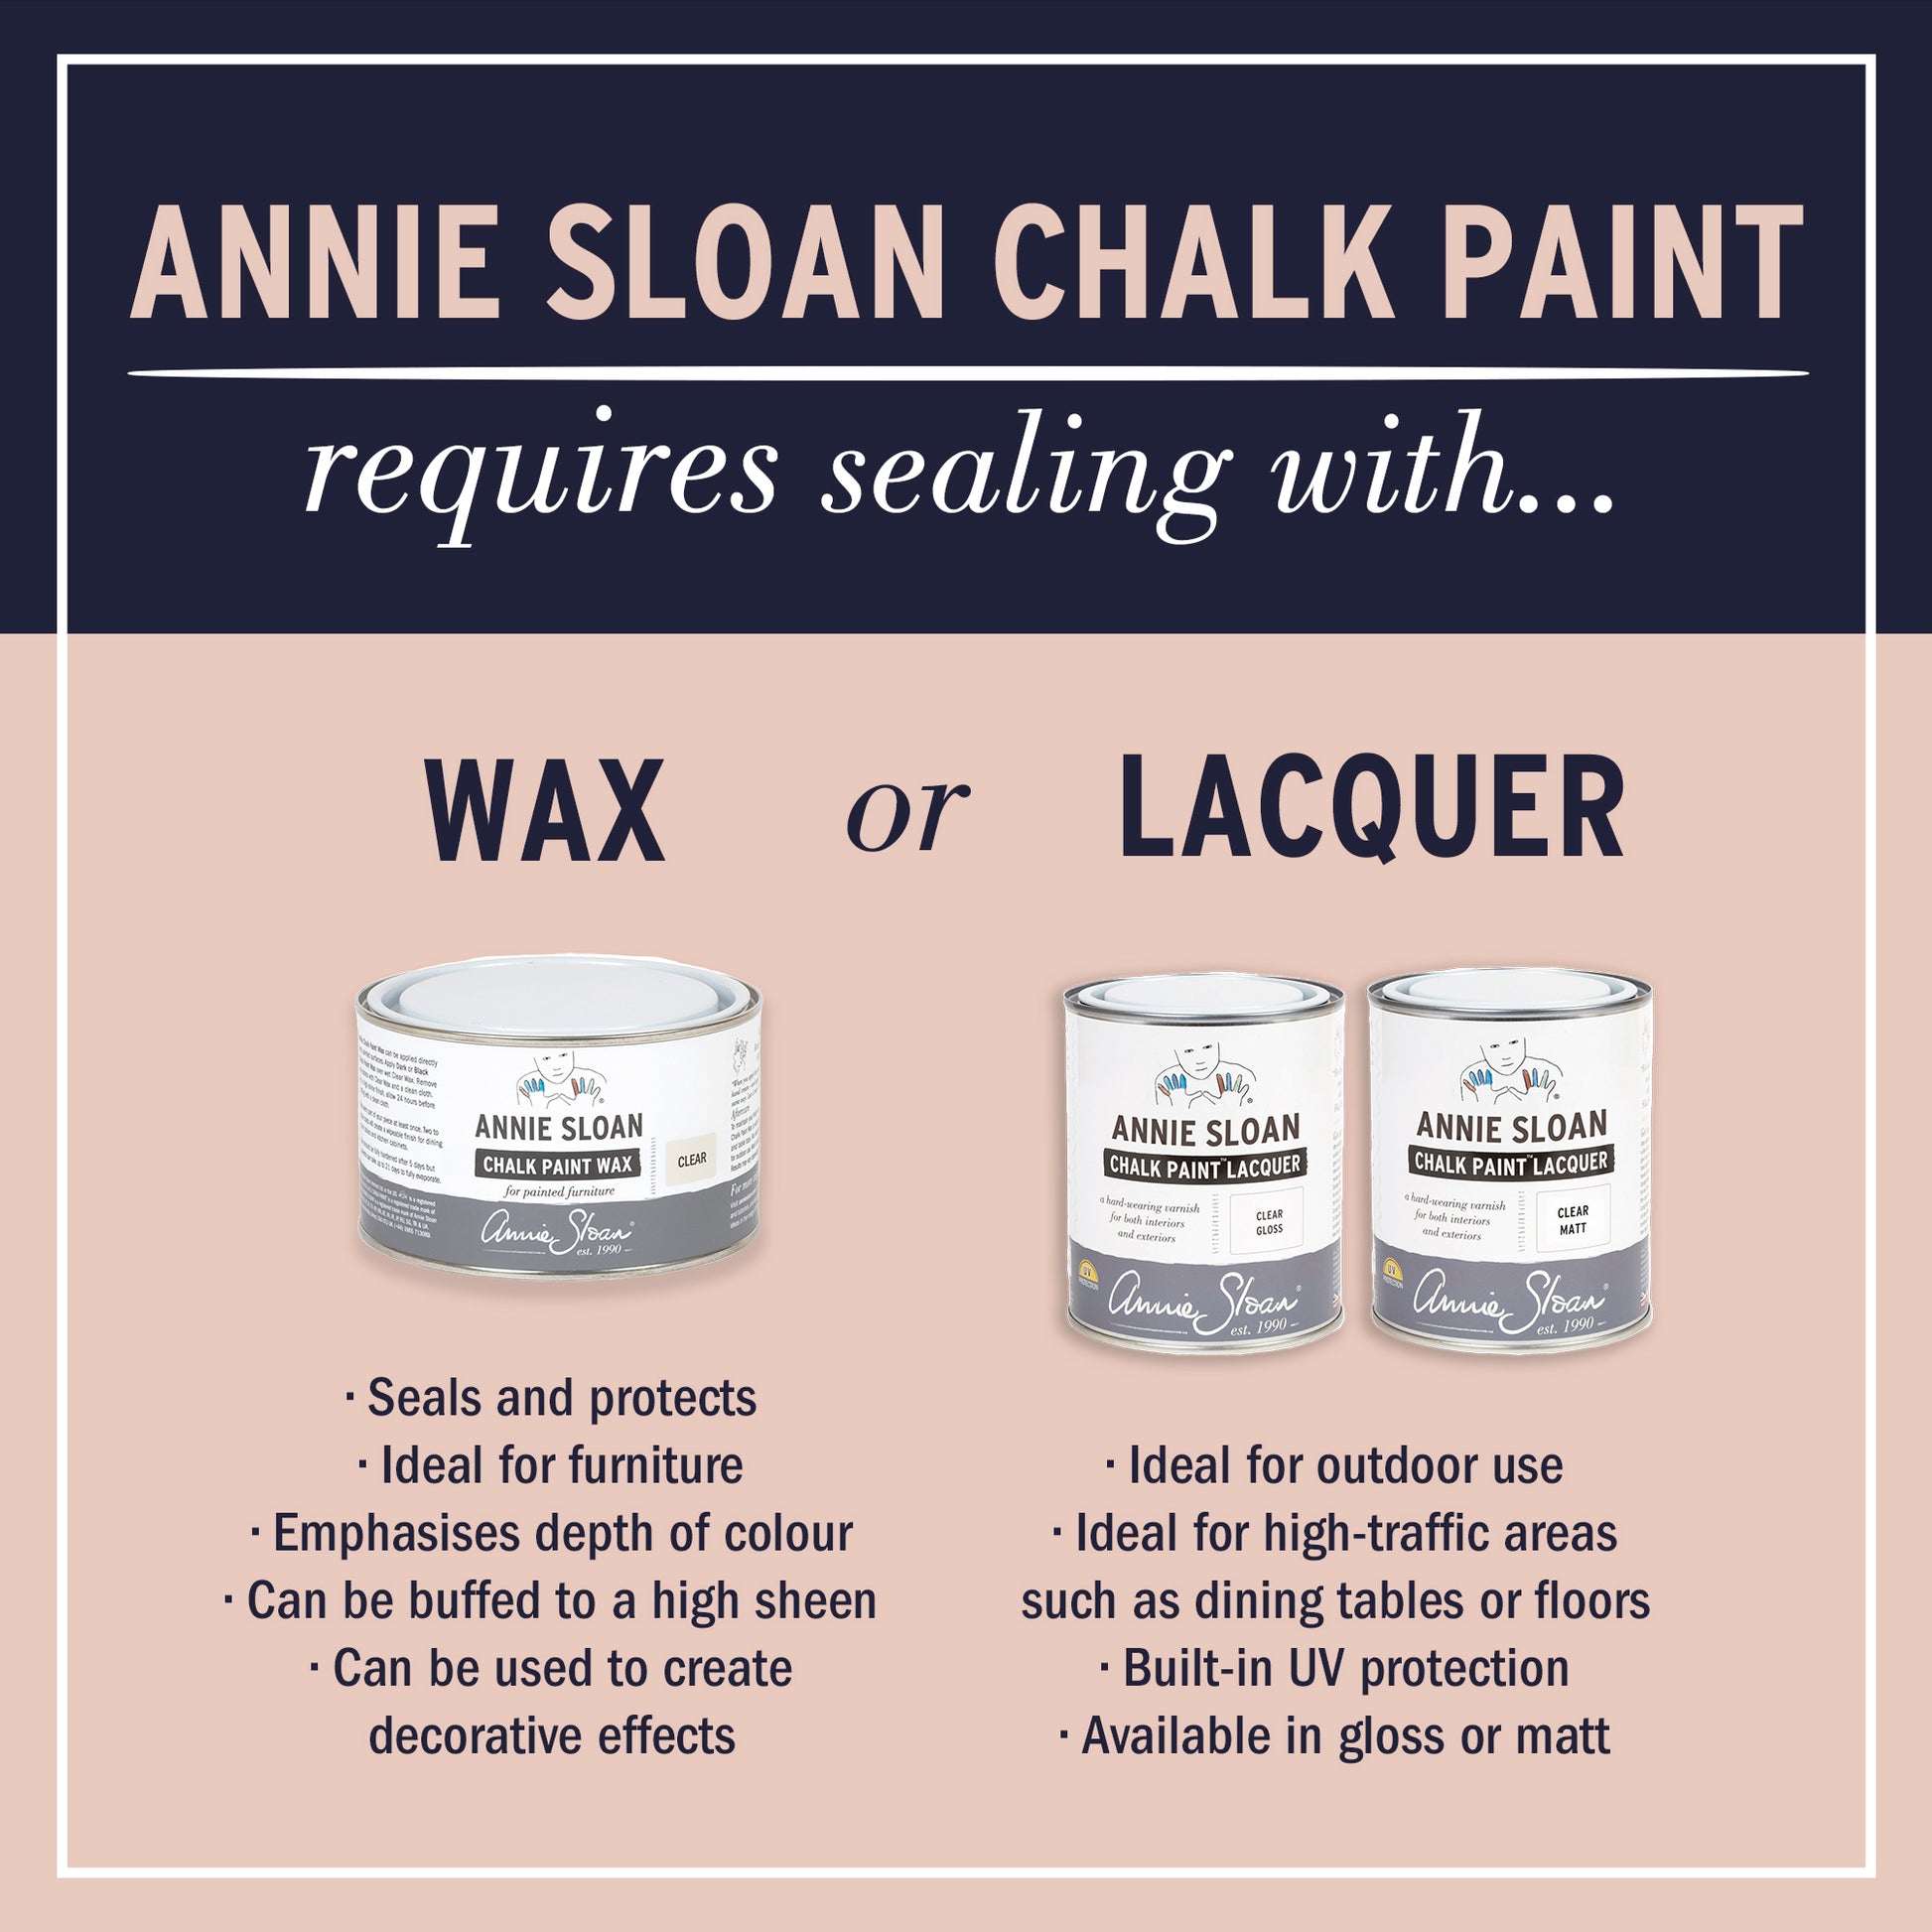 Annie Sloan Chalk Paint® - Paprika Red - The 3 Painted Pugs